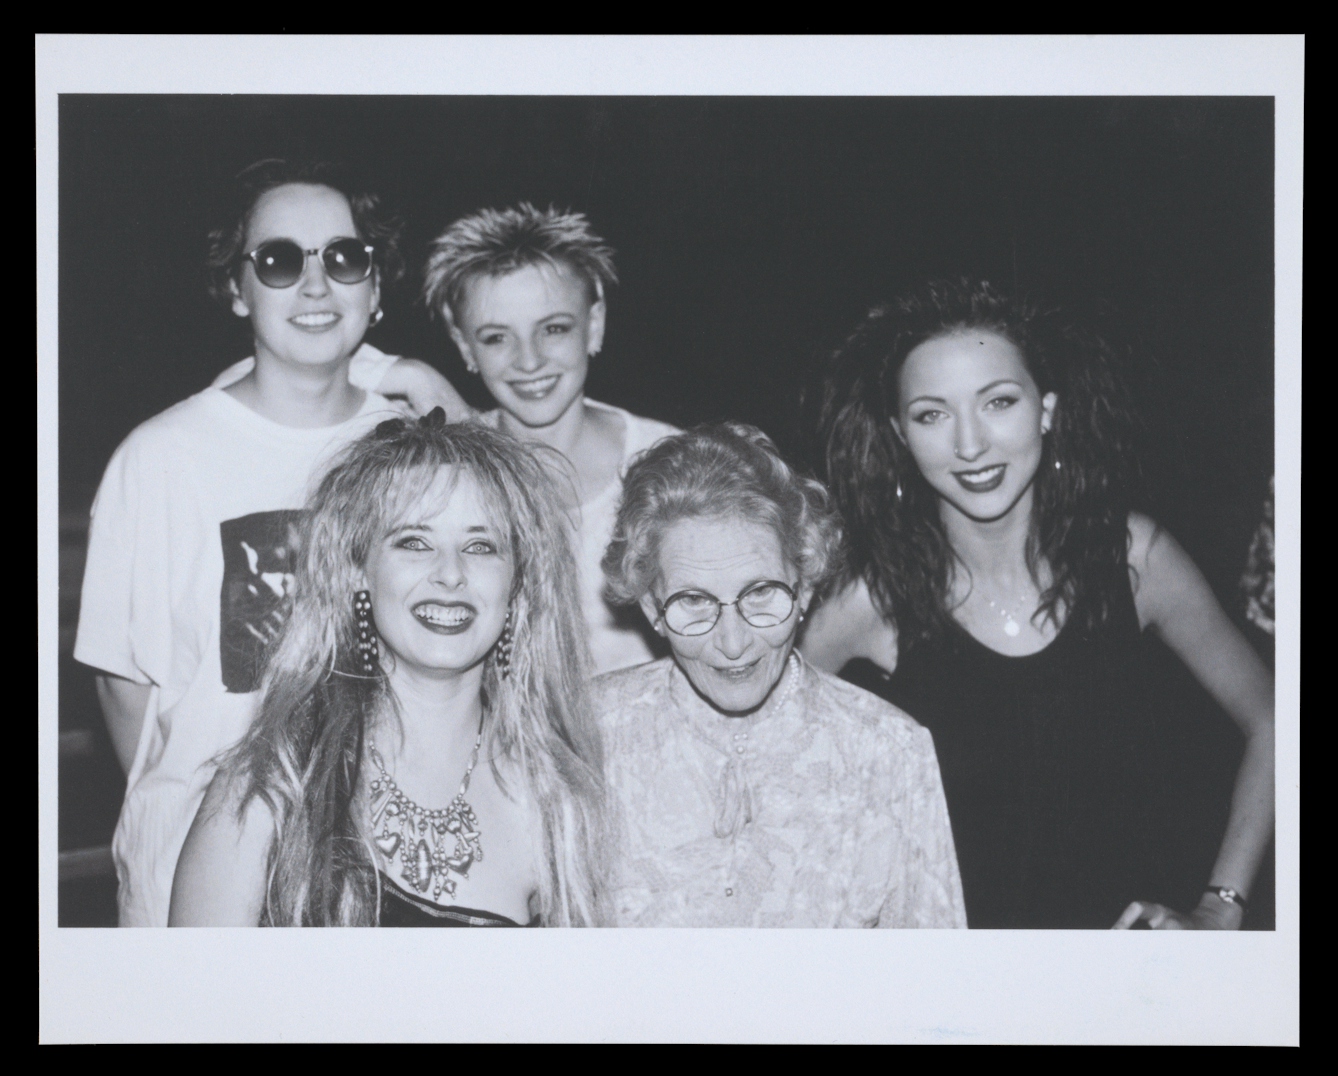 Photograph of a black and white archive photographic print from the 1980s against a black background. The print shows a group photograph of 4 young people surrounding an older woman who is wearing glasses. Everyone is looking to camera and smiling.